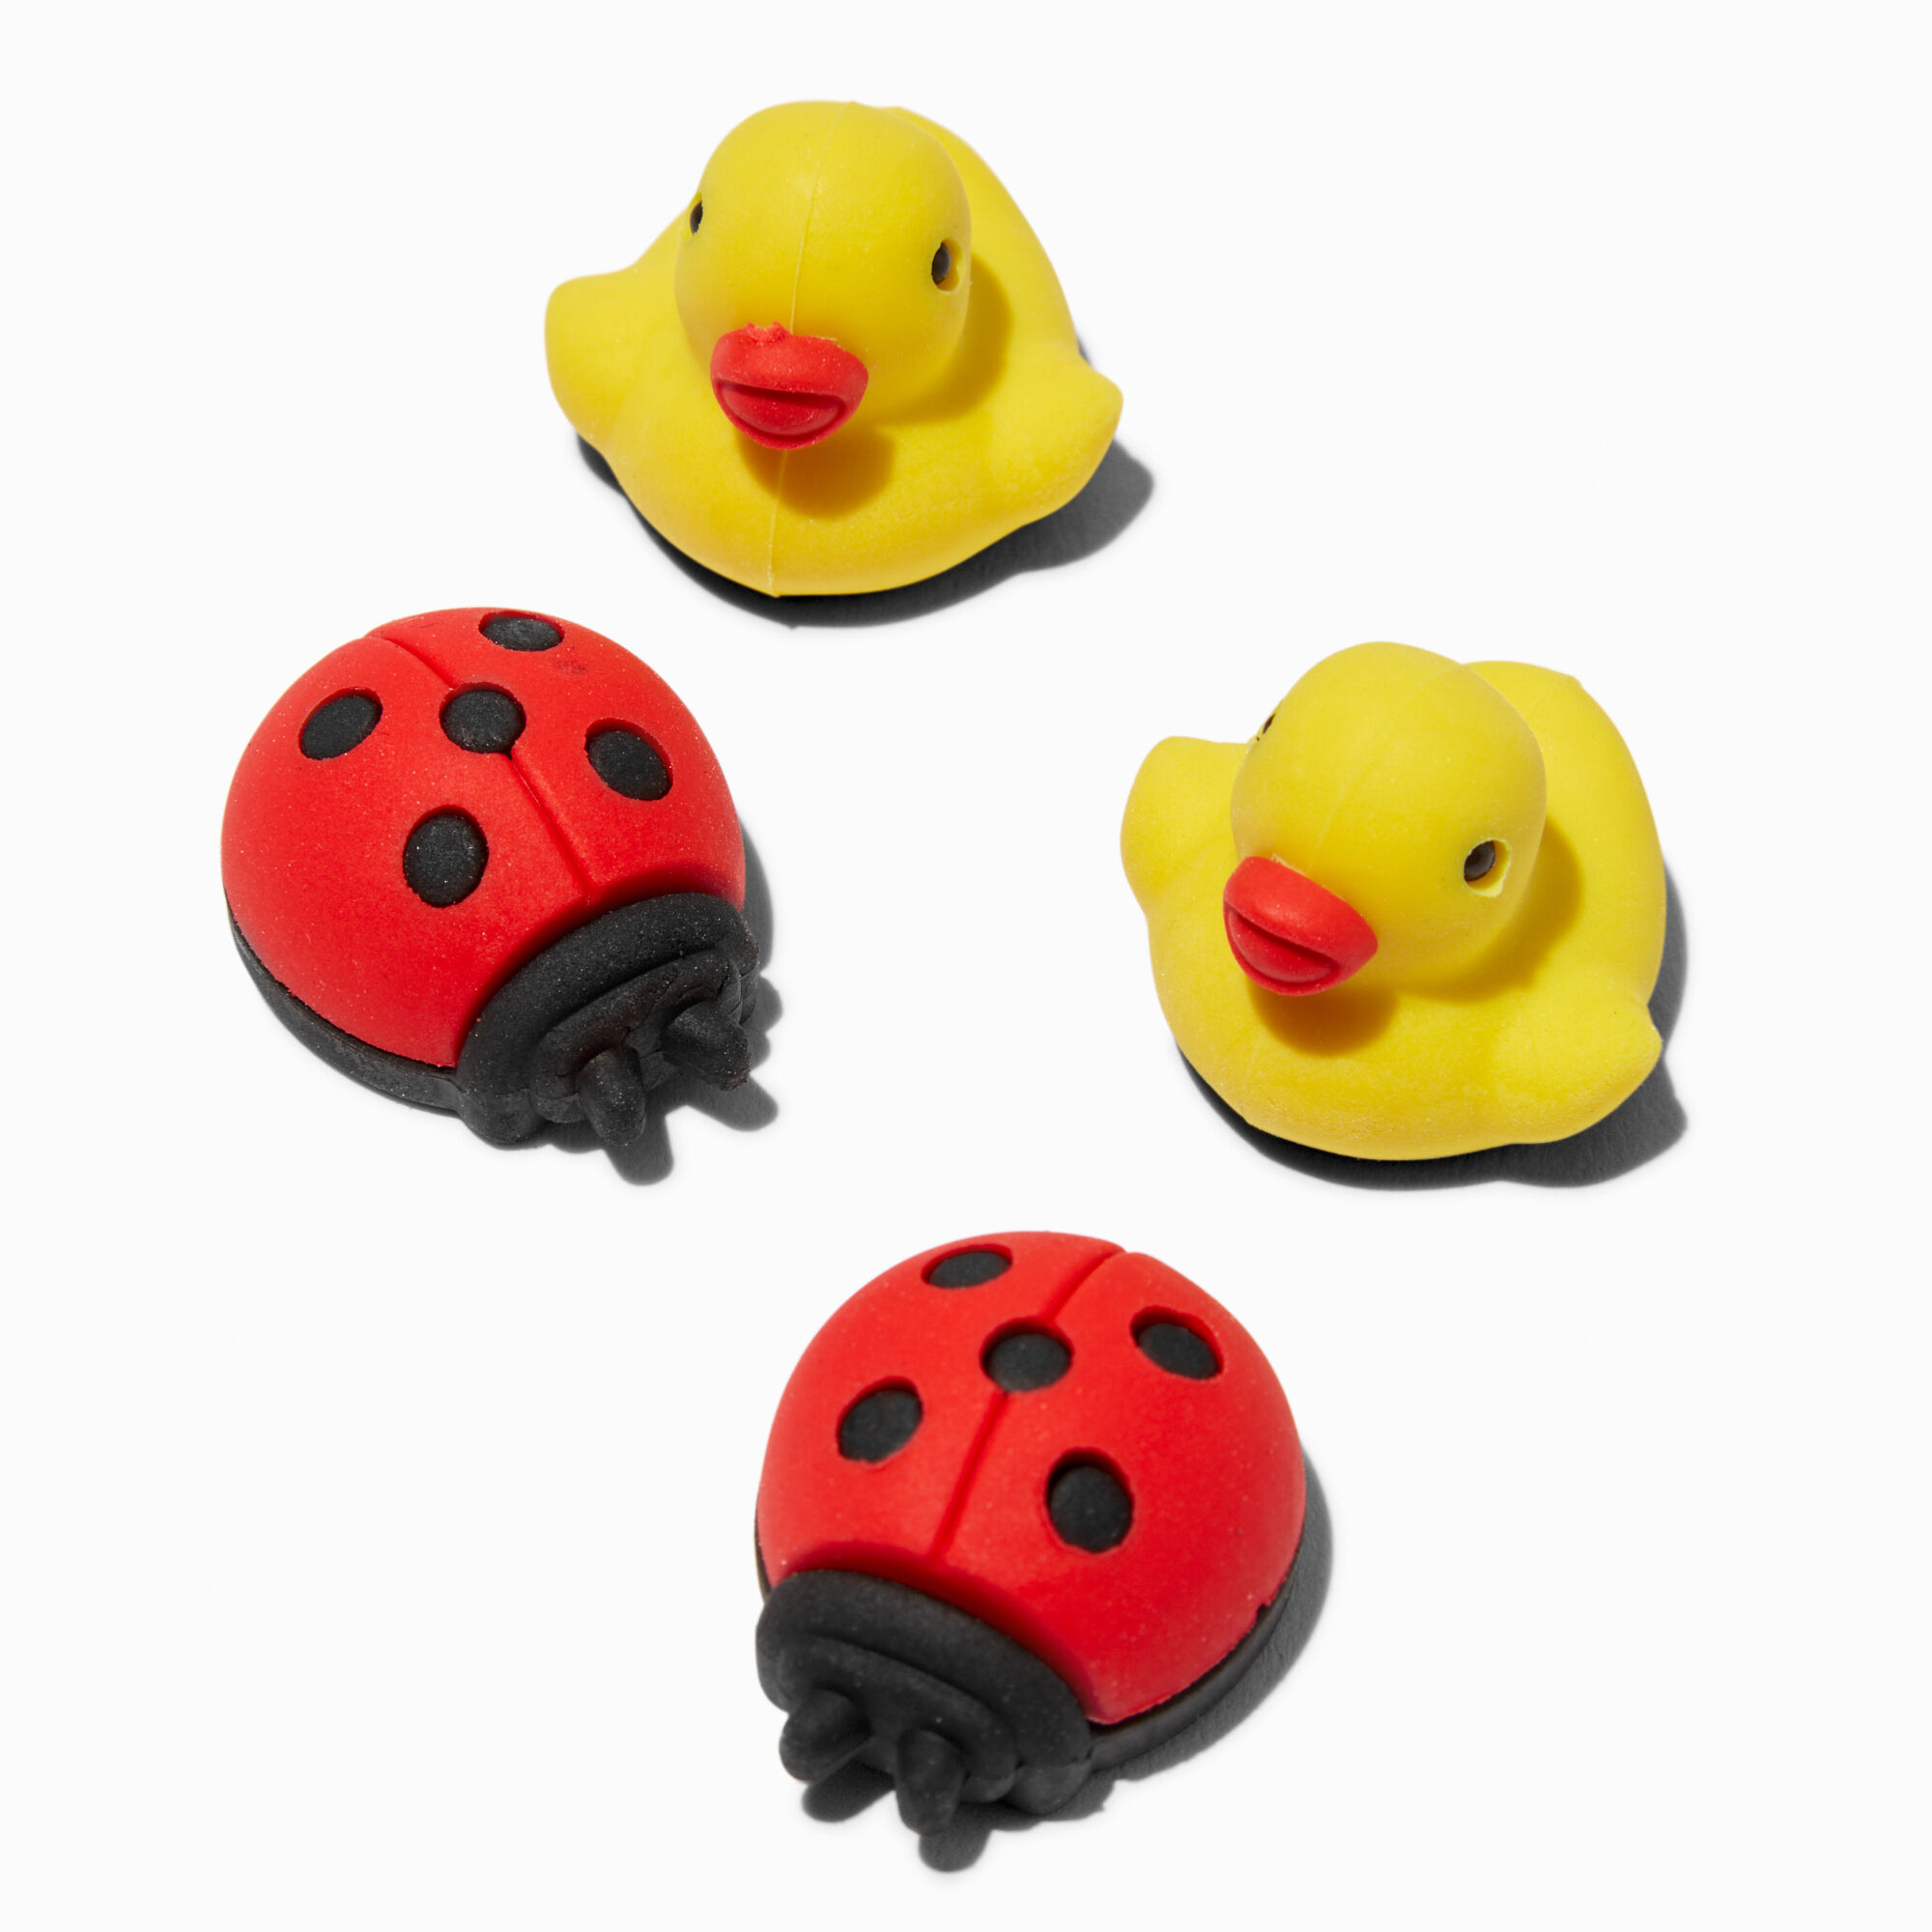 View Claires Duck Ladybug Erasers 4 Pack information